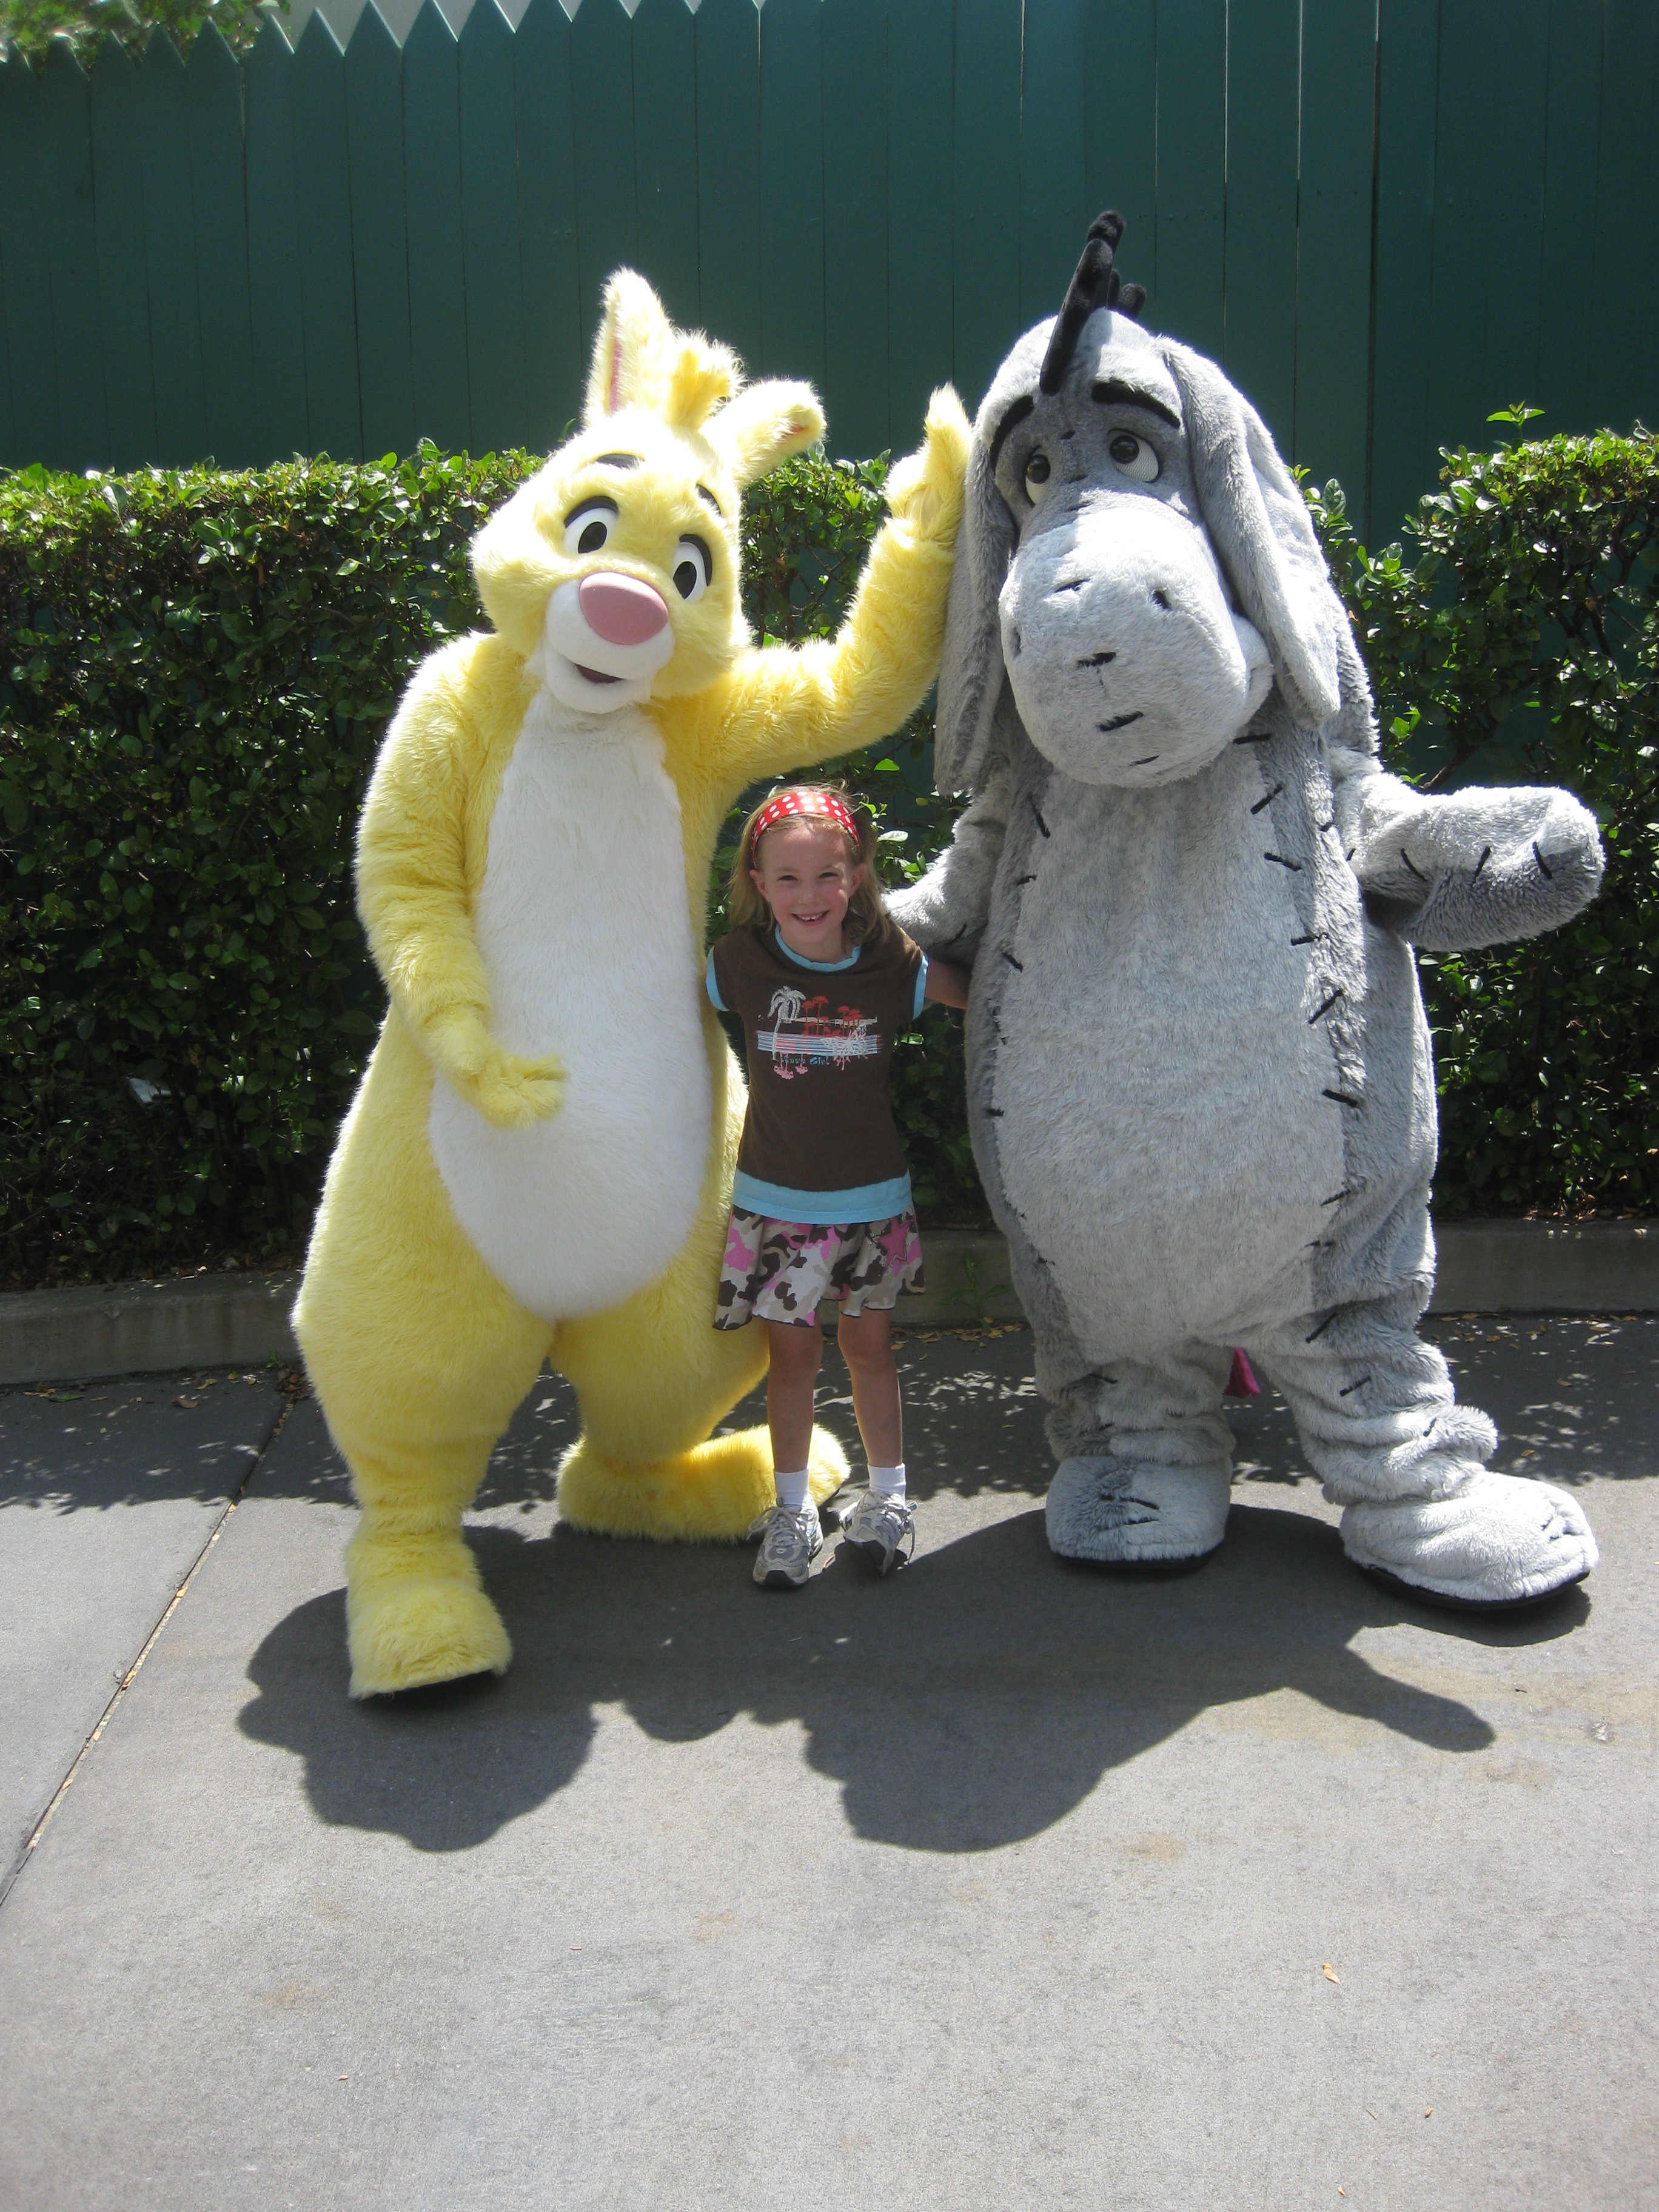 We met Yellow Rabbit from Winnie the Pooh back in 2010 at the old Tear Drop training location.  Haven't seen him since.